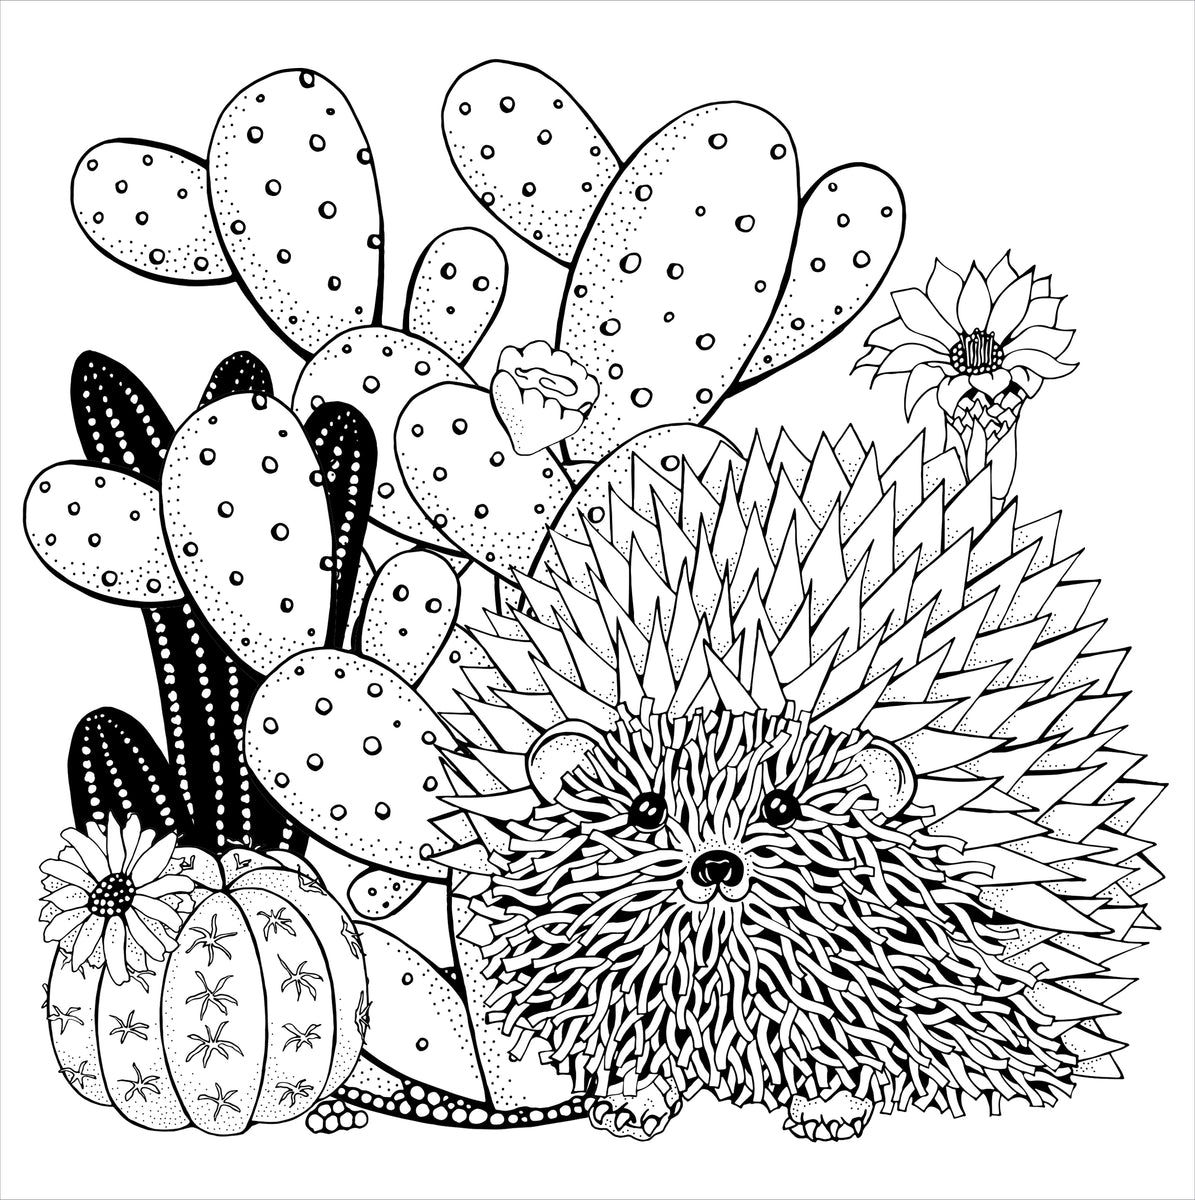 Cactus Coloring For Adults: Mind Relaxing And Calming